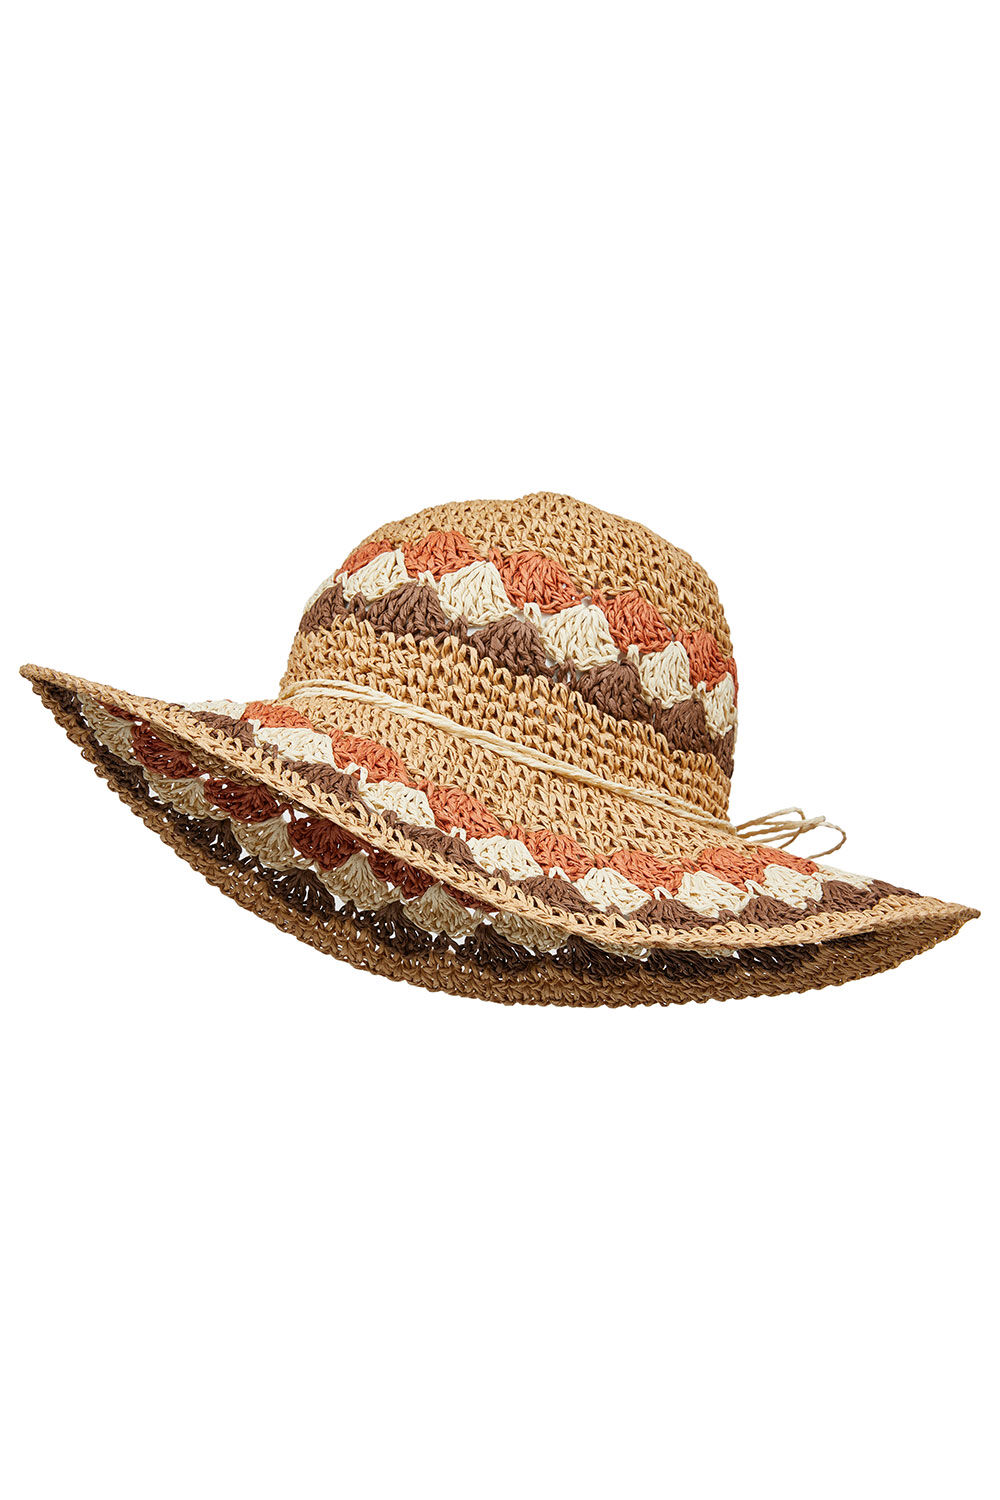 Bonmarche Multi Beach Hat With ed Weave, Size: One Size